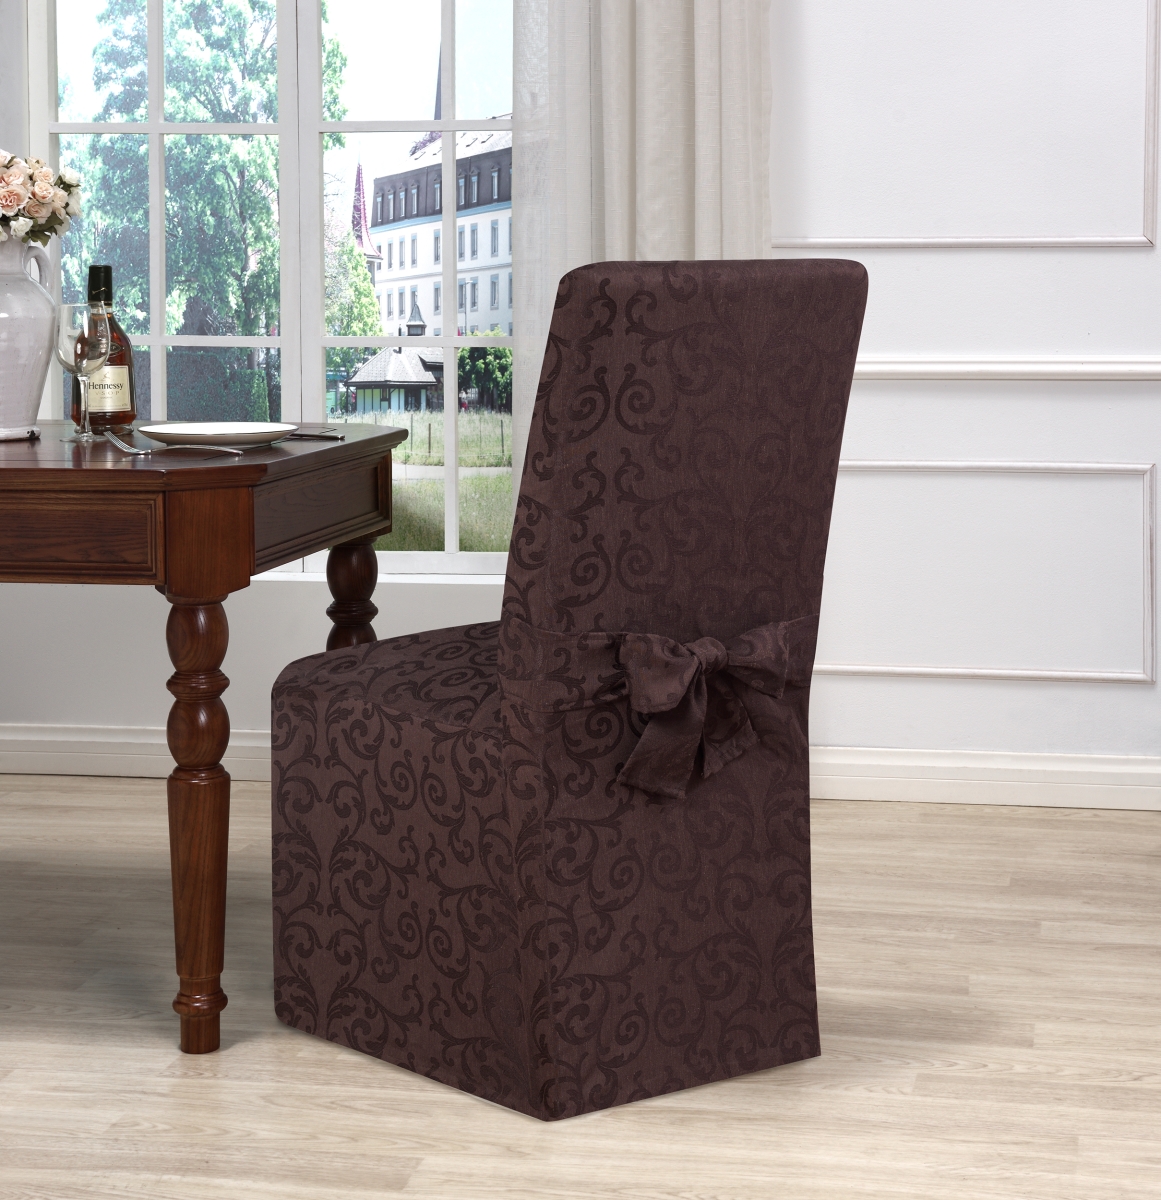 Amer-drc-bn Americana Dining Chair Cover, Brown